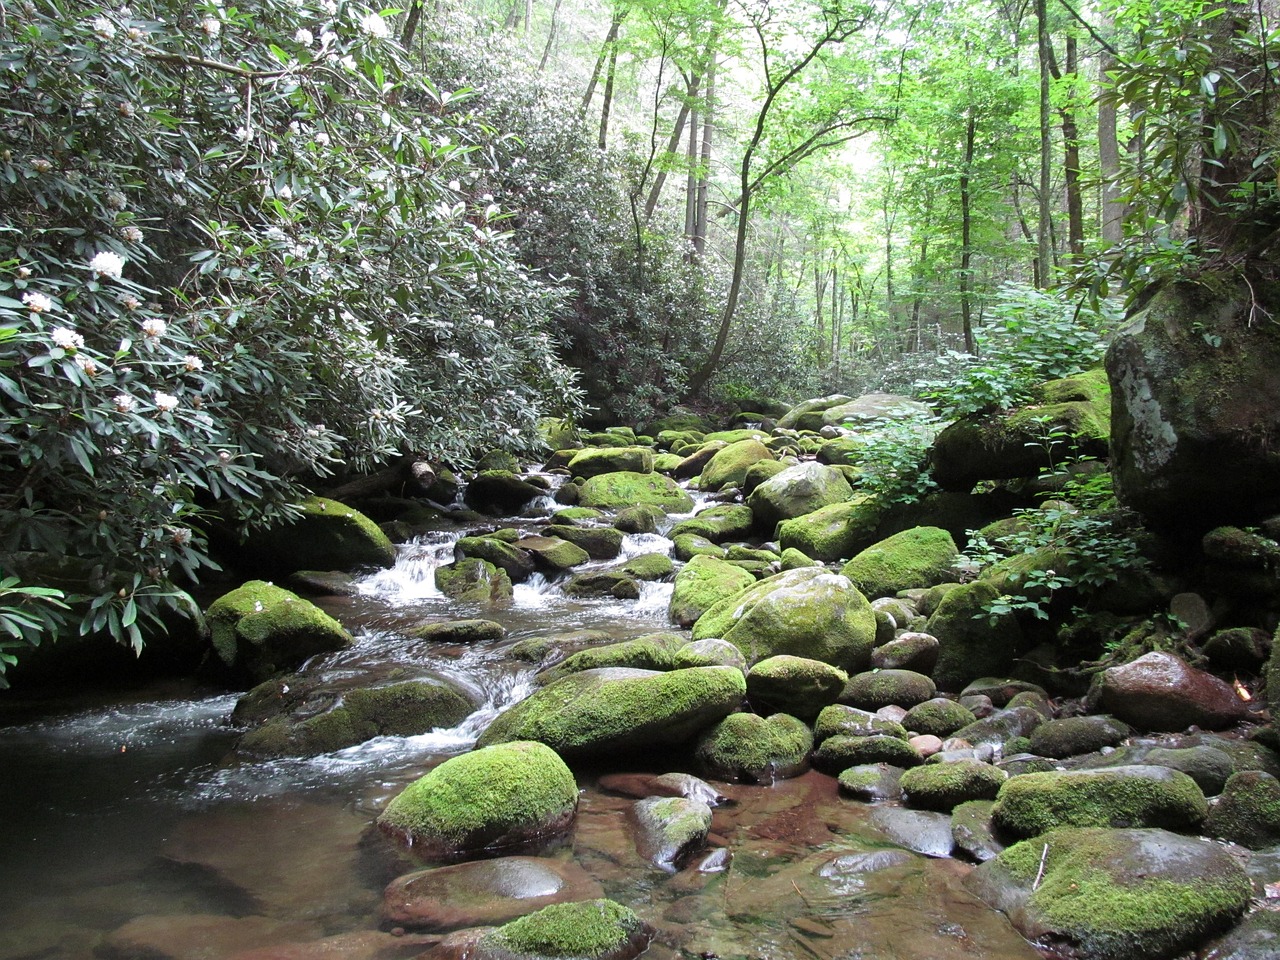 3-Day Adventure in the Smoky Mountains